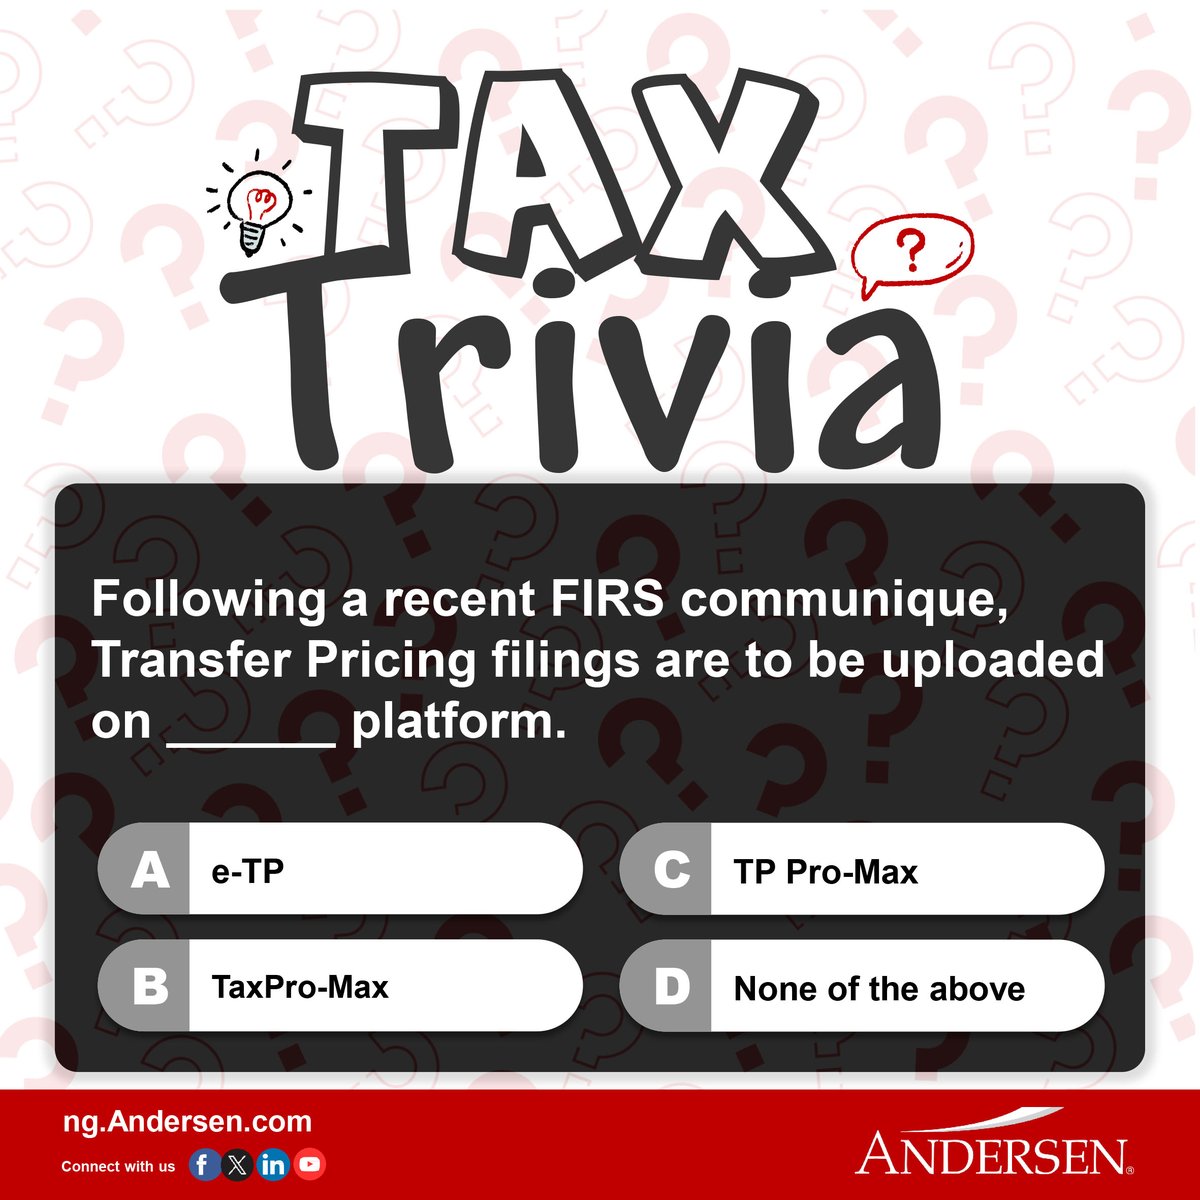 Did you know? Transfer Pricing filings are now required to be uploaded. Stay informed and compliant! #TaxTrivia #Trivatuesday #Nigeria #TransferPricing